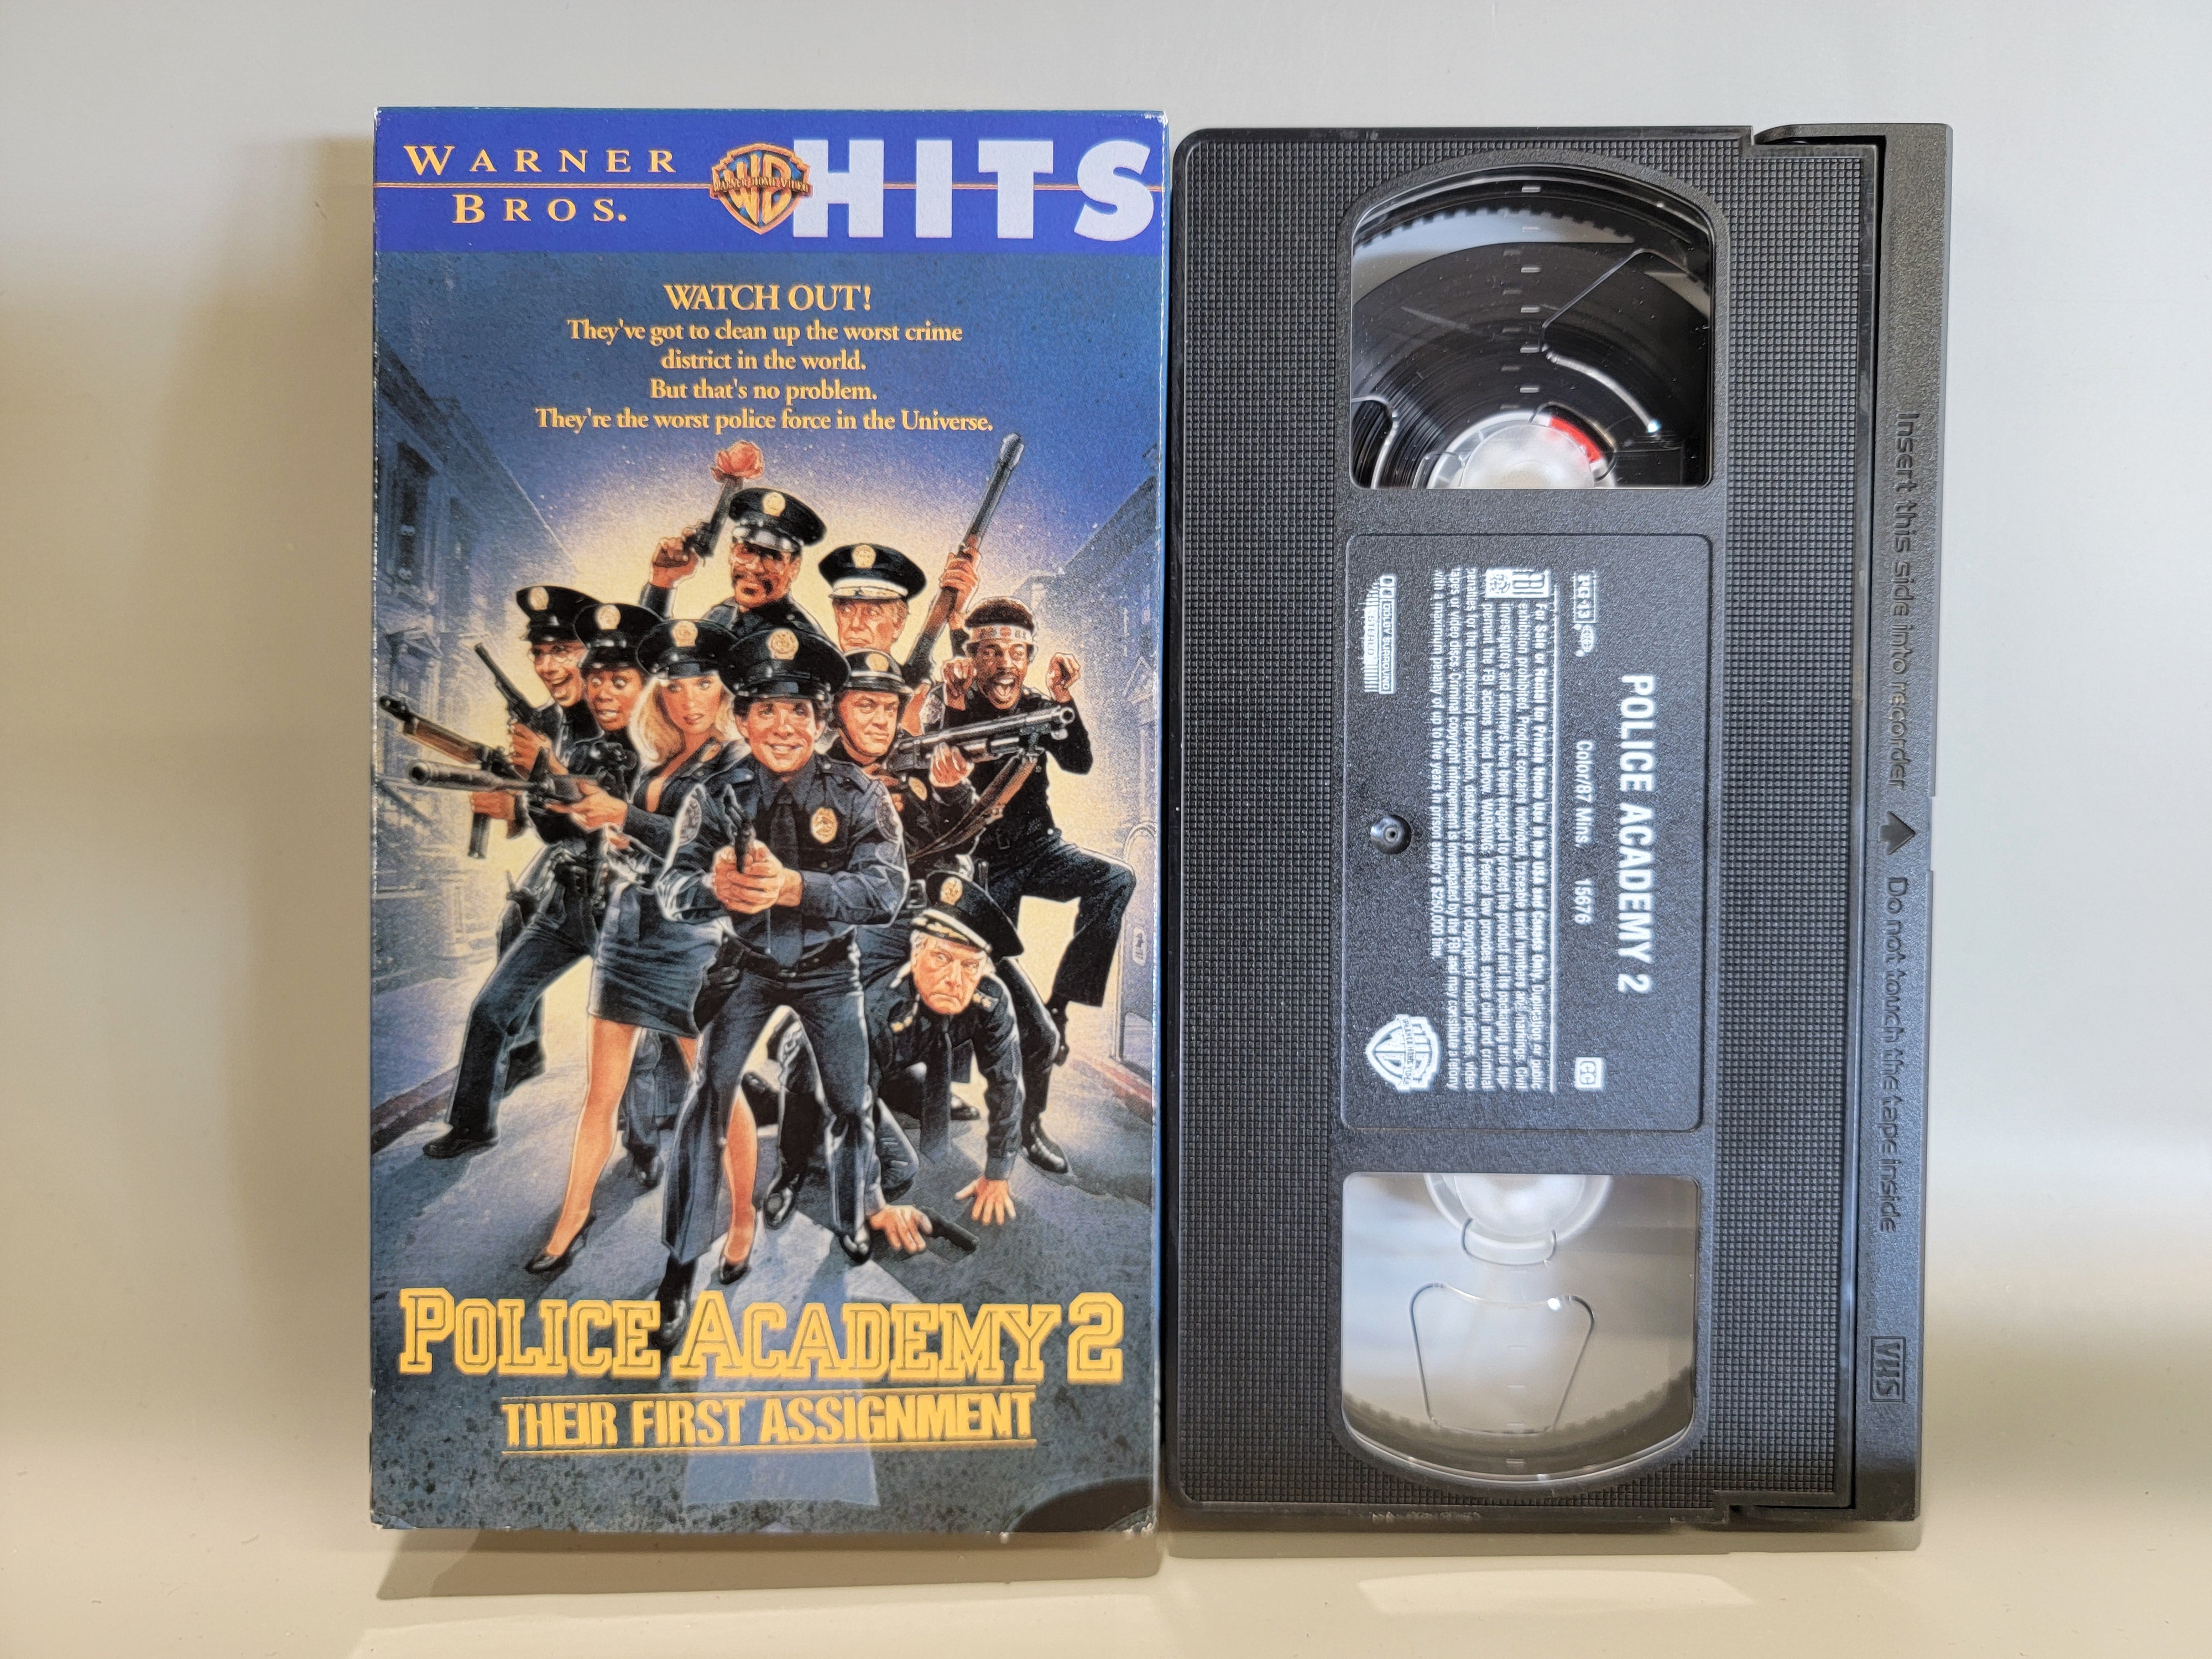 POLICE ACADEMY 2: THEIR FIRST ASSIGNMENT VHS [USED]